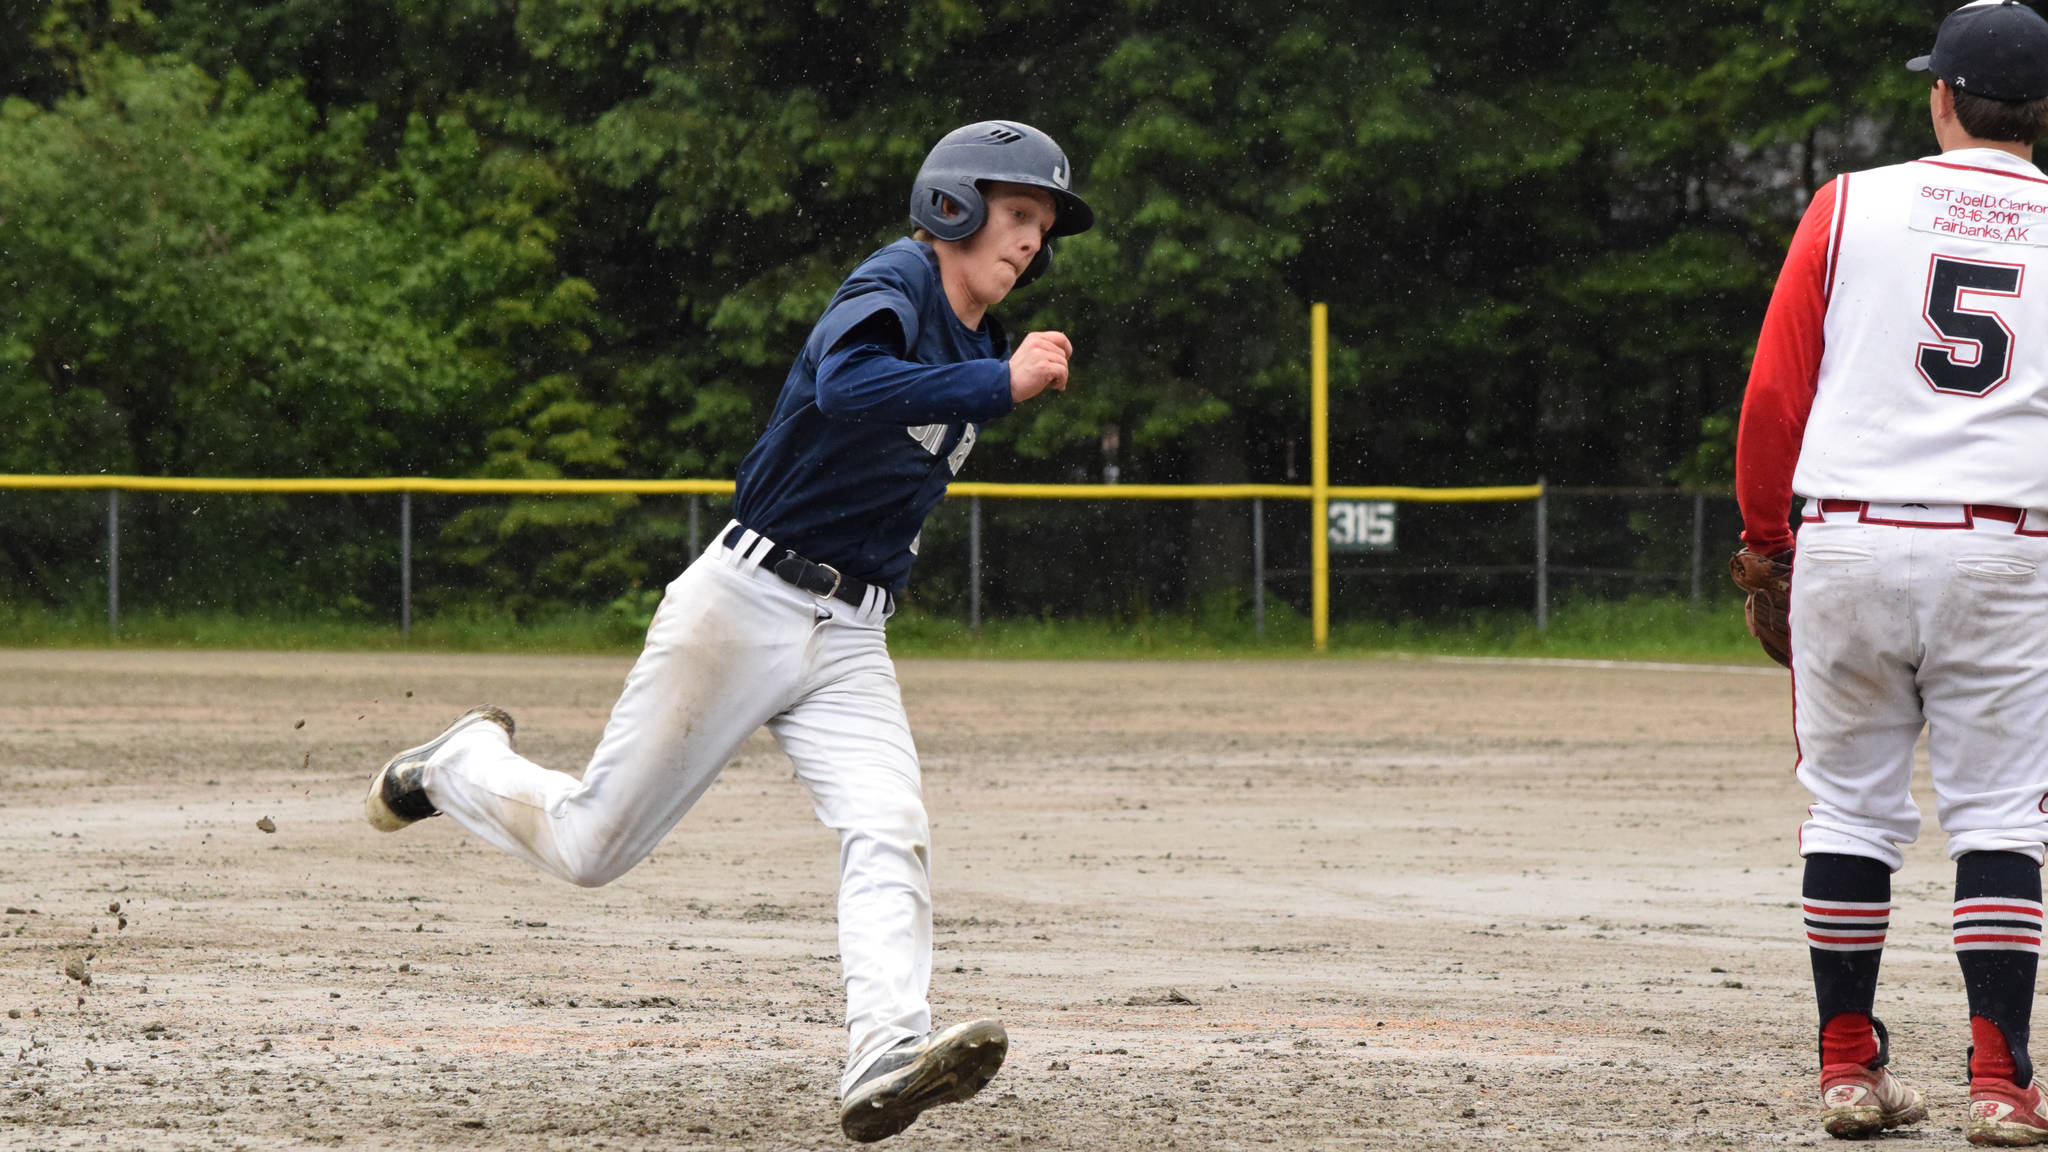 Juneau Post 25’s Zeb Storie rounds third base on his way to score against Wasilla Saturday afternoon. Post 25 won 14-2 over Wasilla. (Nolin Ainsworth | Juneau Empire)